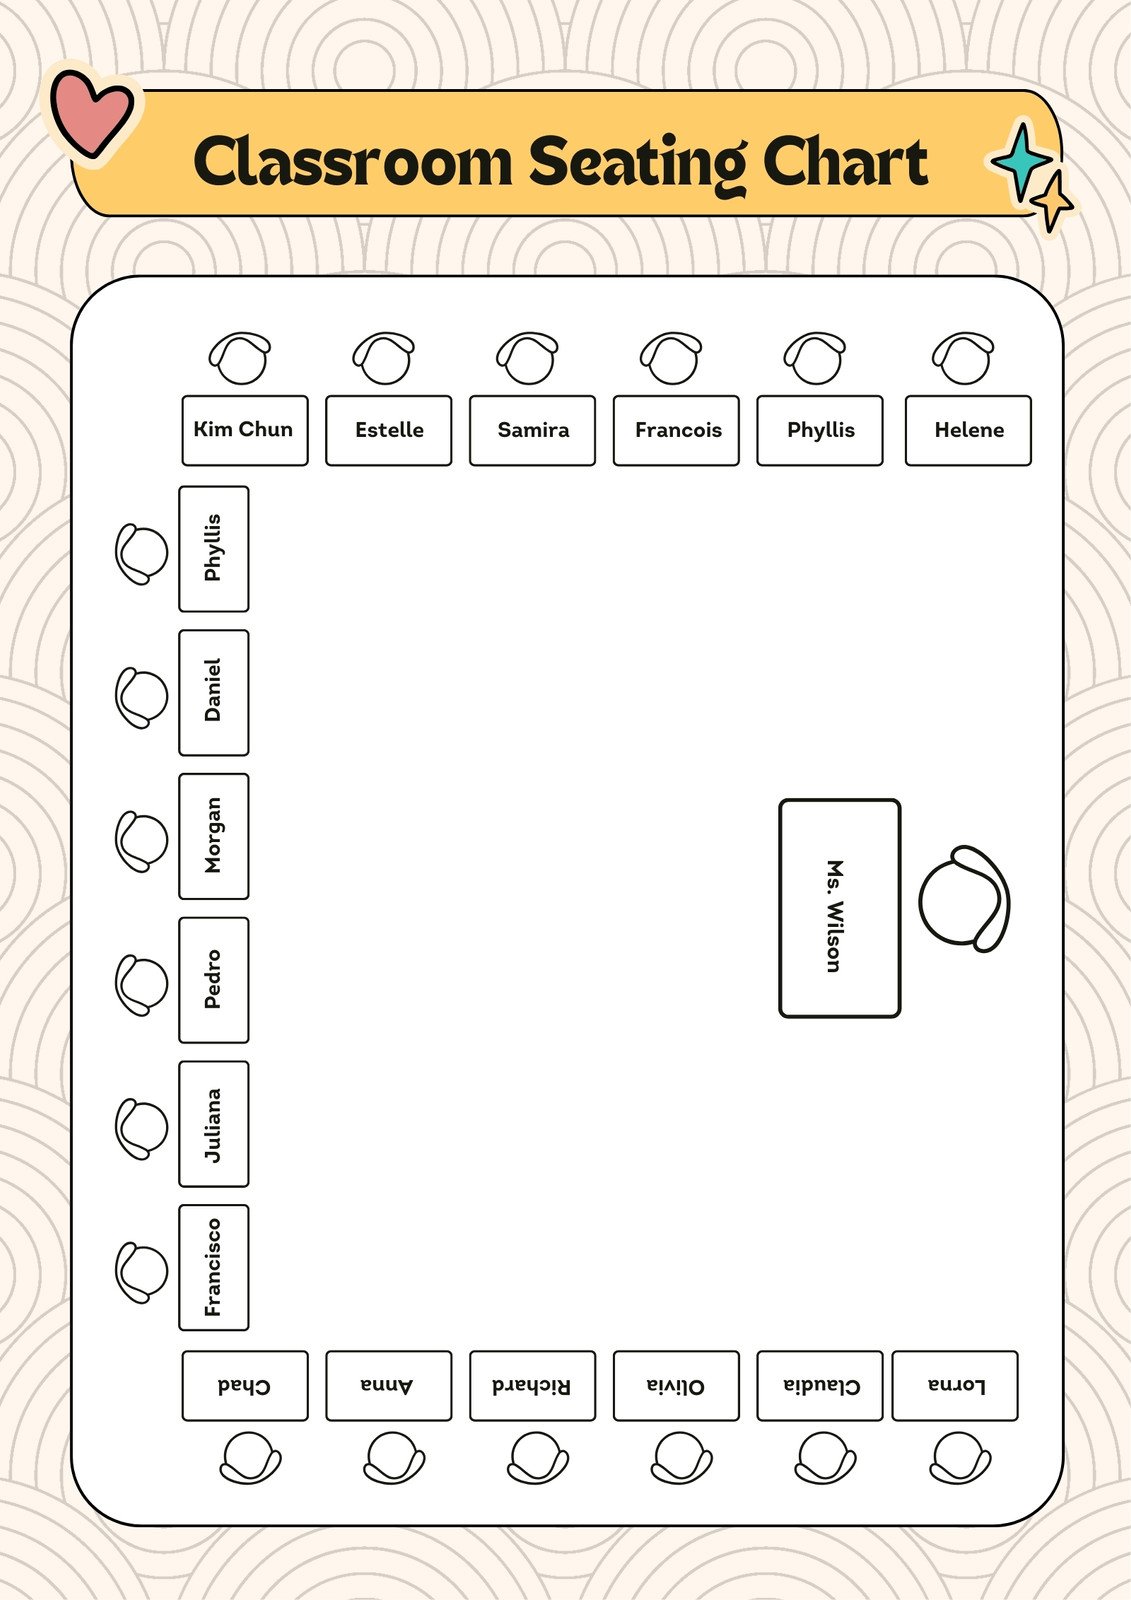 Classroom Seating Chart in Cream and Yellow Retro Style 